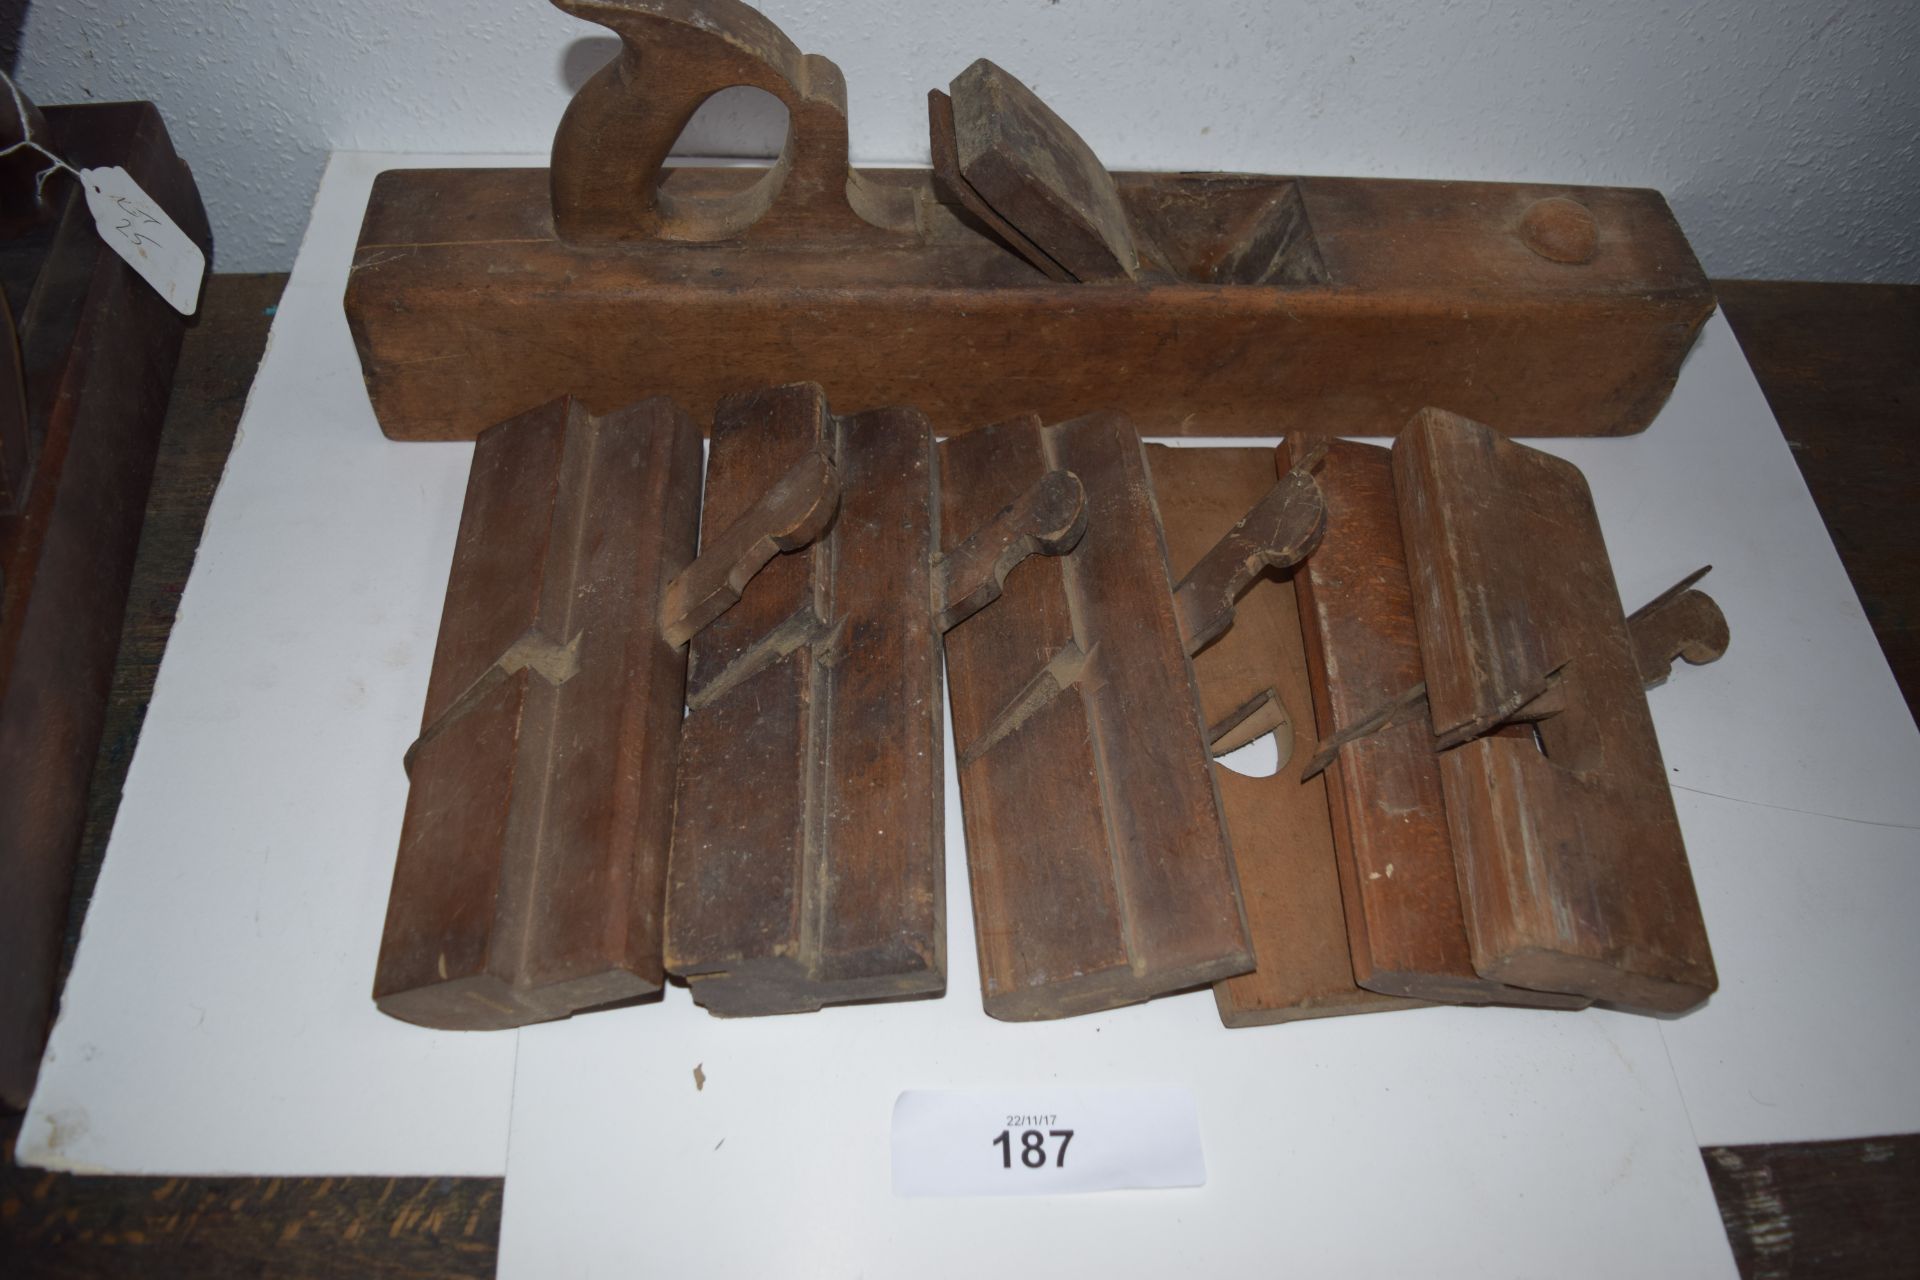 6 x moulding planes and 22" bench plane, all standard wood, no makers mark - mixed condition